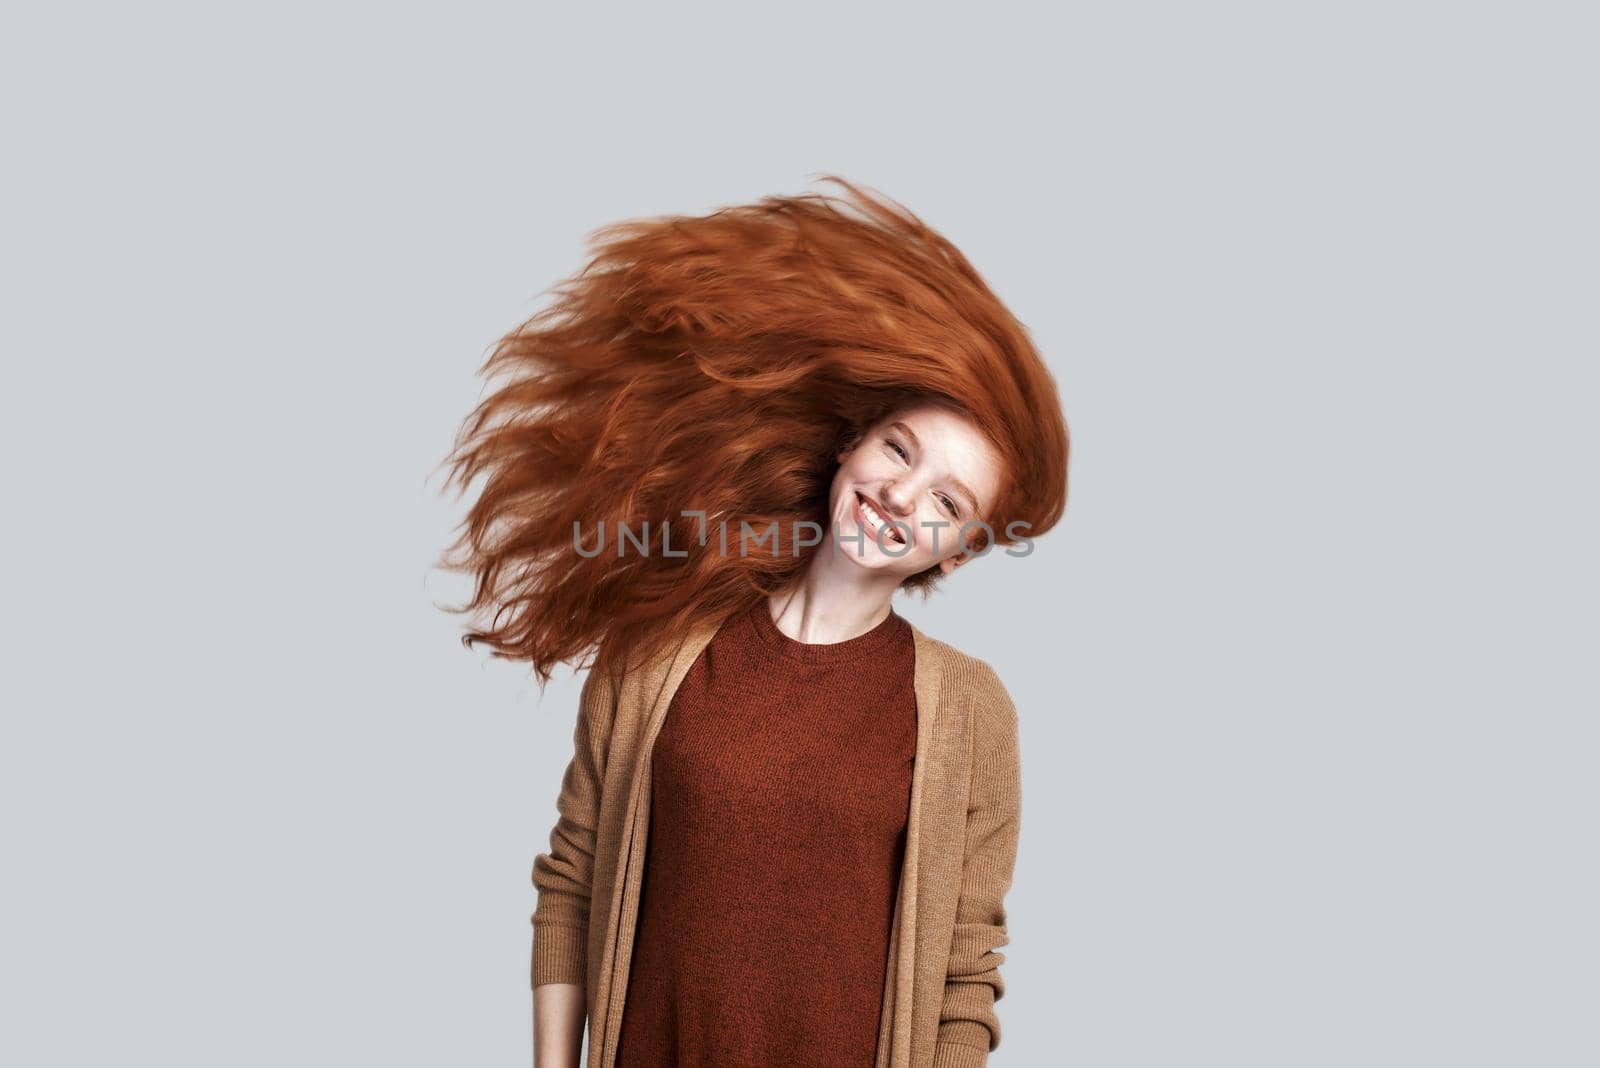 Studio shot of cheerful and young redhead woman with tousled hair smiling at camera while standing against grey background Beauty concept. Happiness